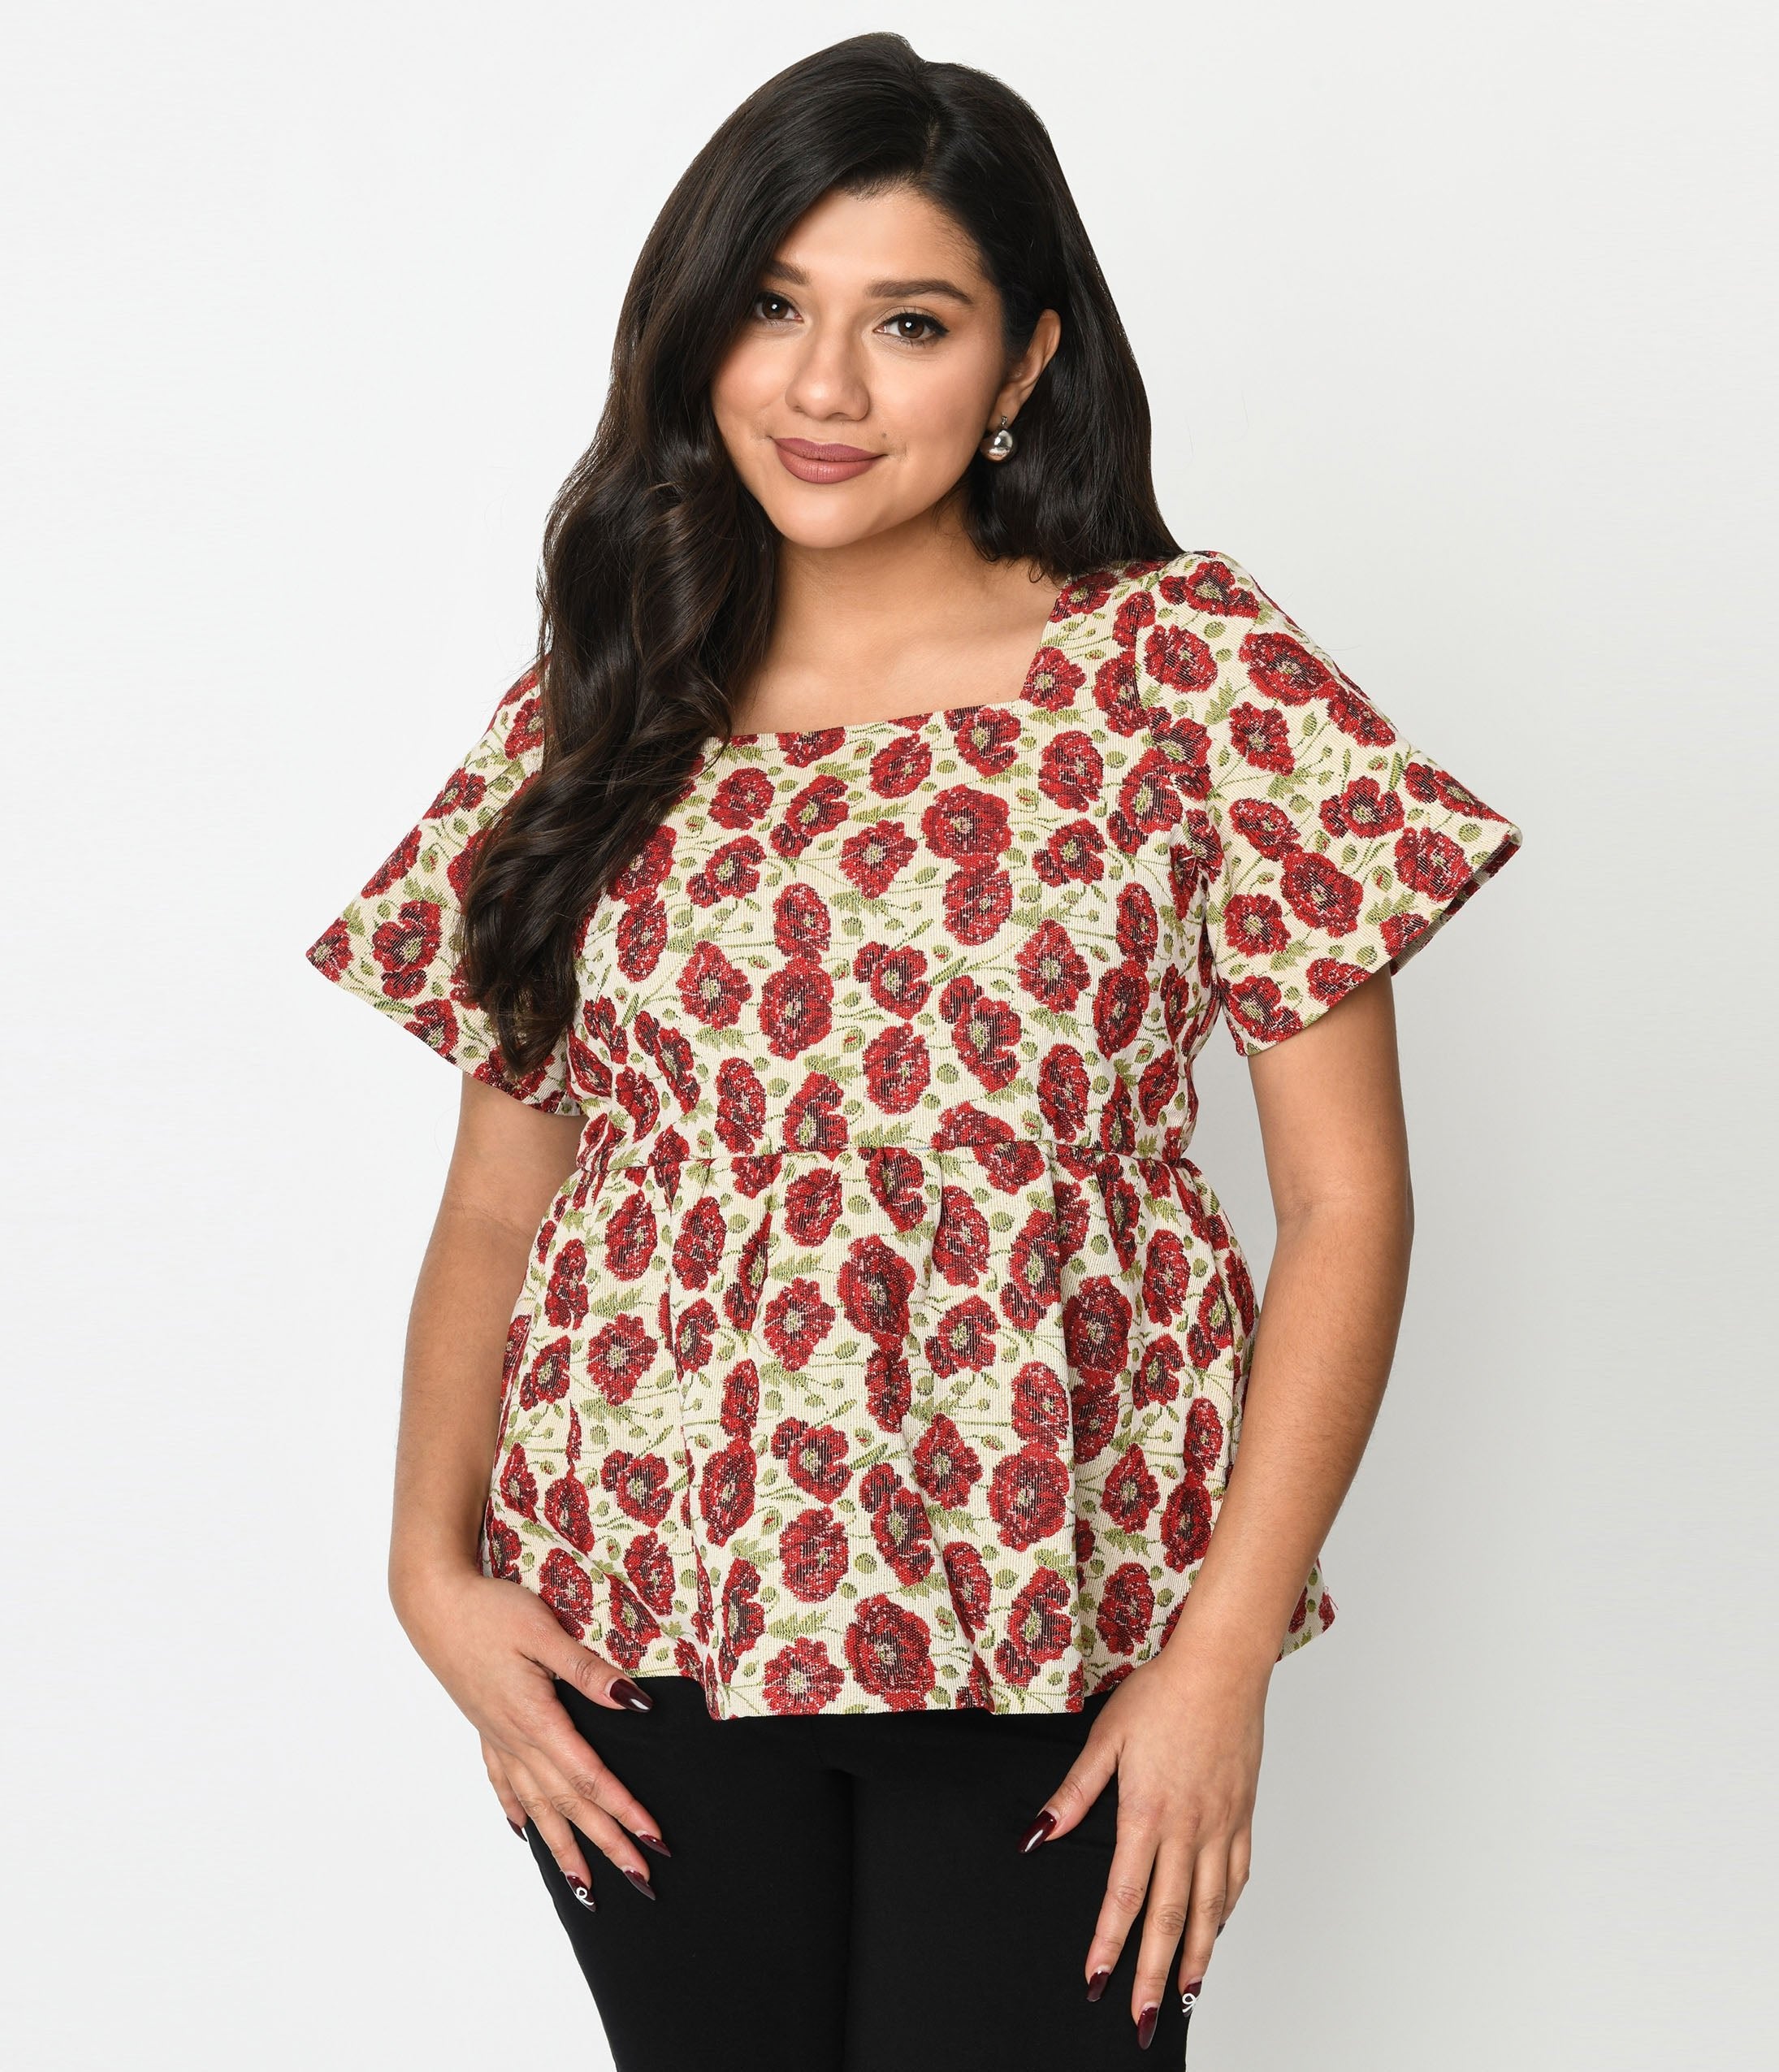 

Ivory & Red Floral Kiss Jacquard Peplum Top